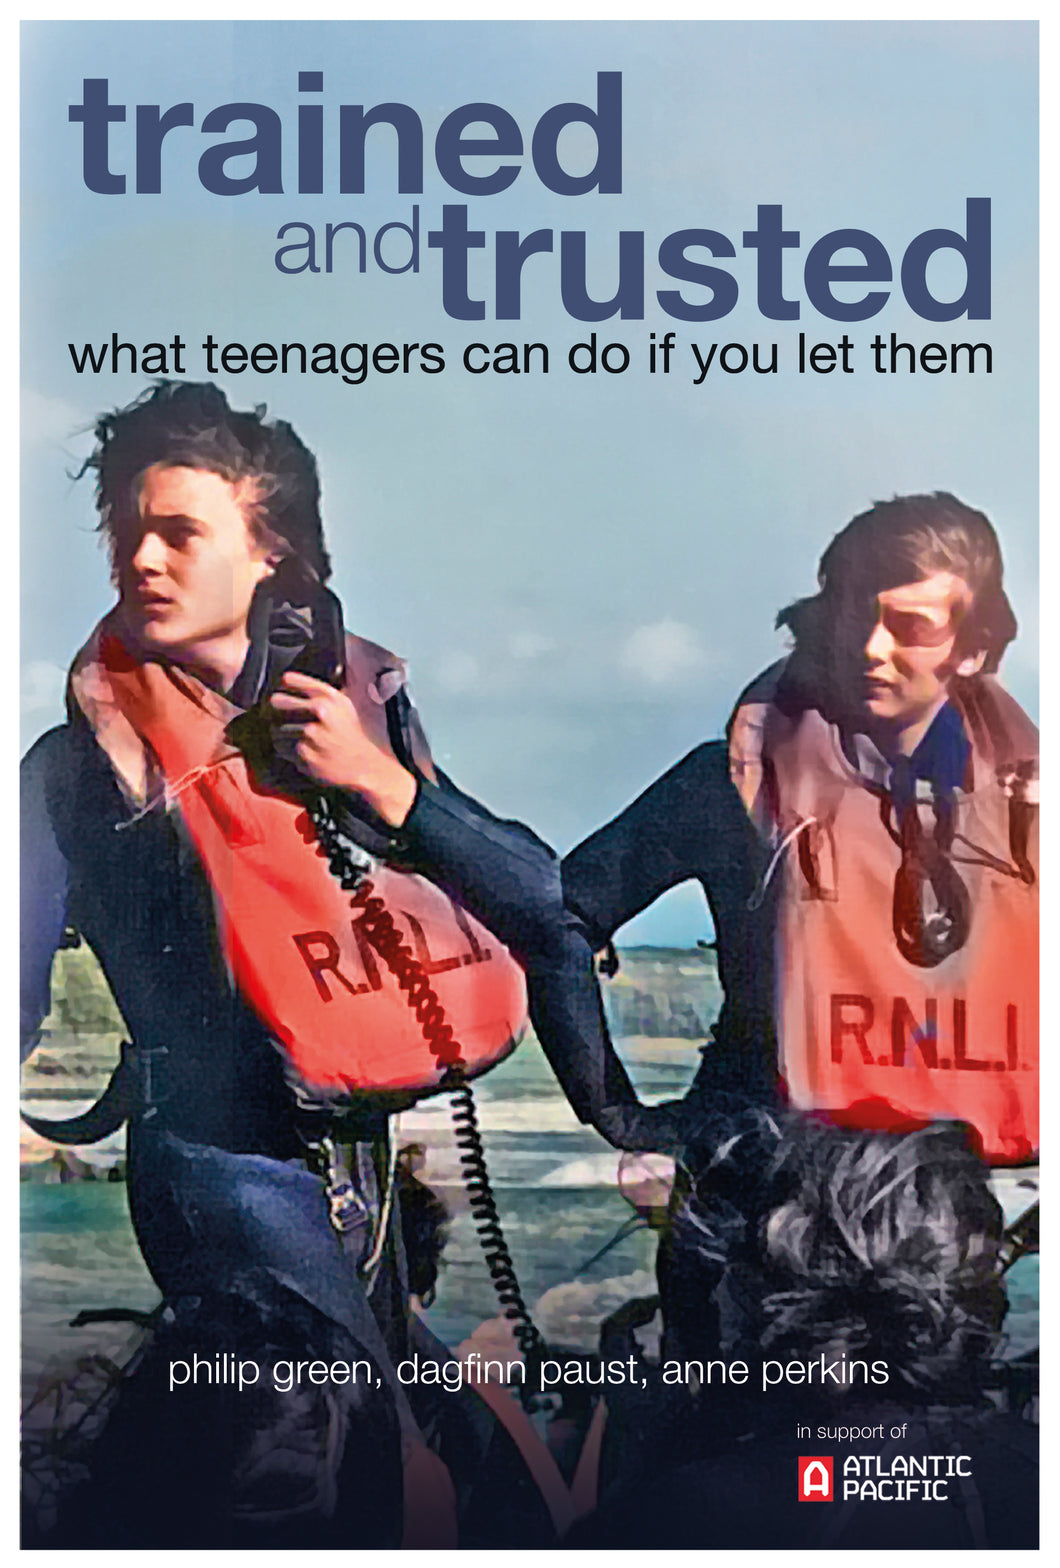 Trained and Trusted - What Teenagers can do if you let them - Philip Green, Dagfinn Paust, Anne Perkins